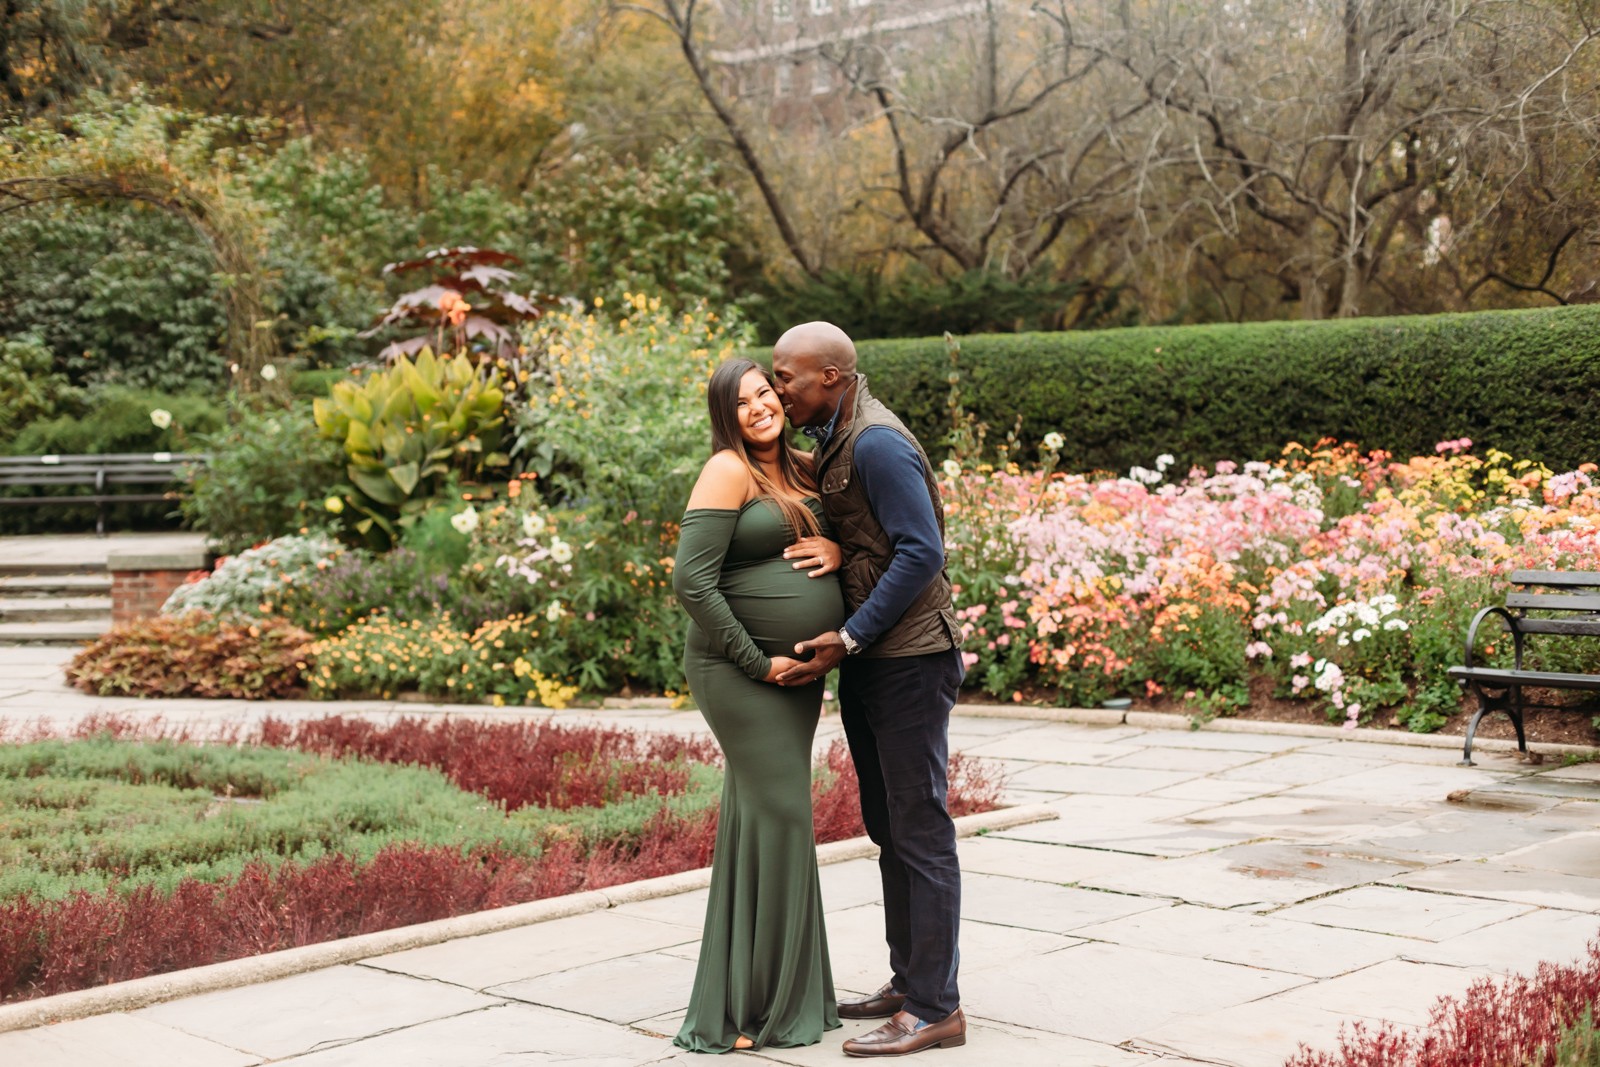 okc maternity pics 15 date ideas to do before baby comes 2022